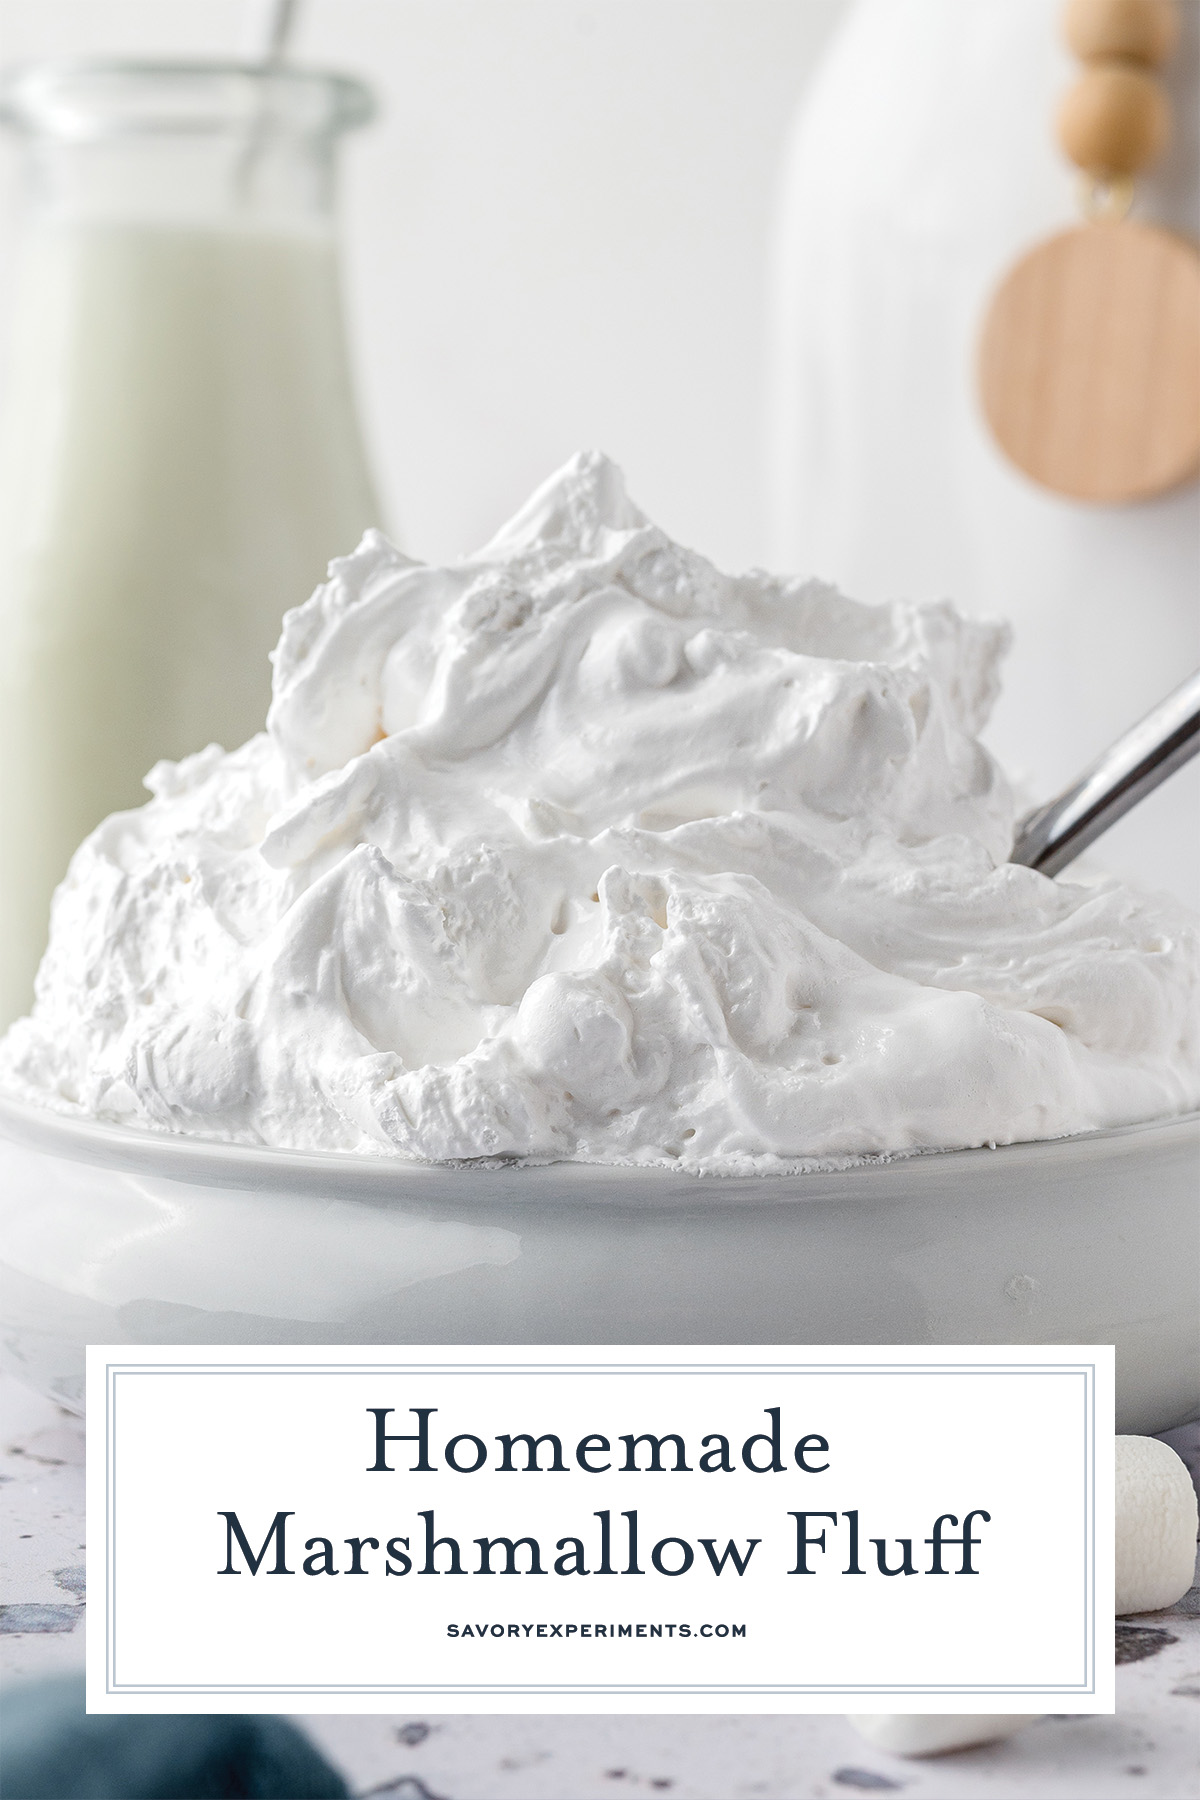 Homemade Marshmallow Fluff Recipe (2 versions: With or Without Corn Syrup)